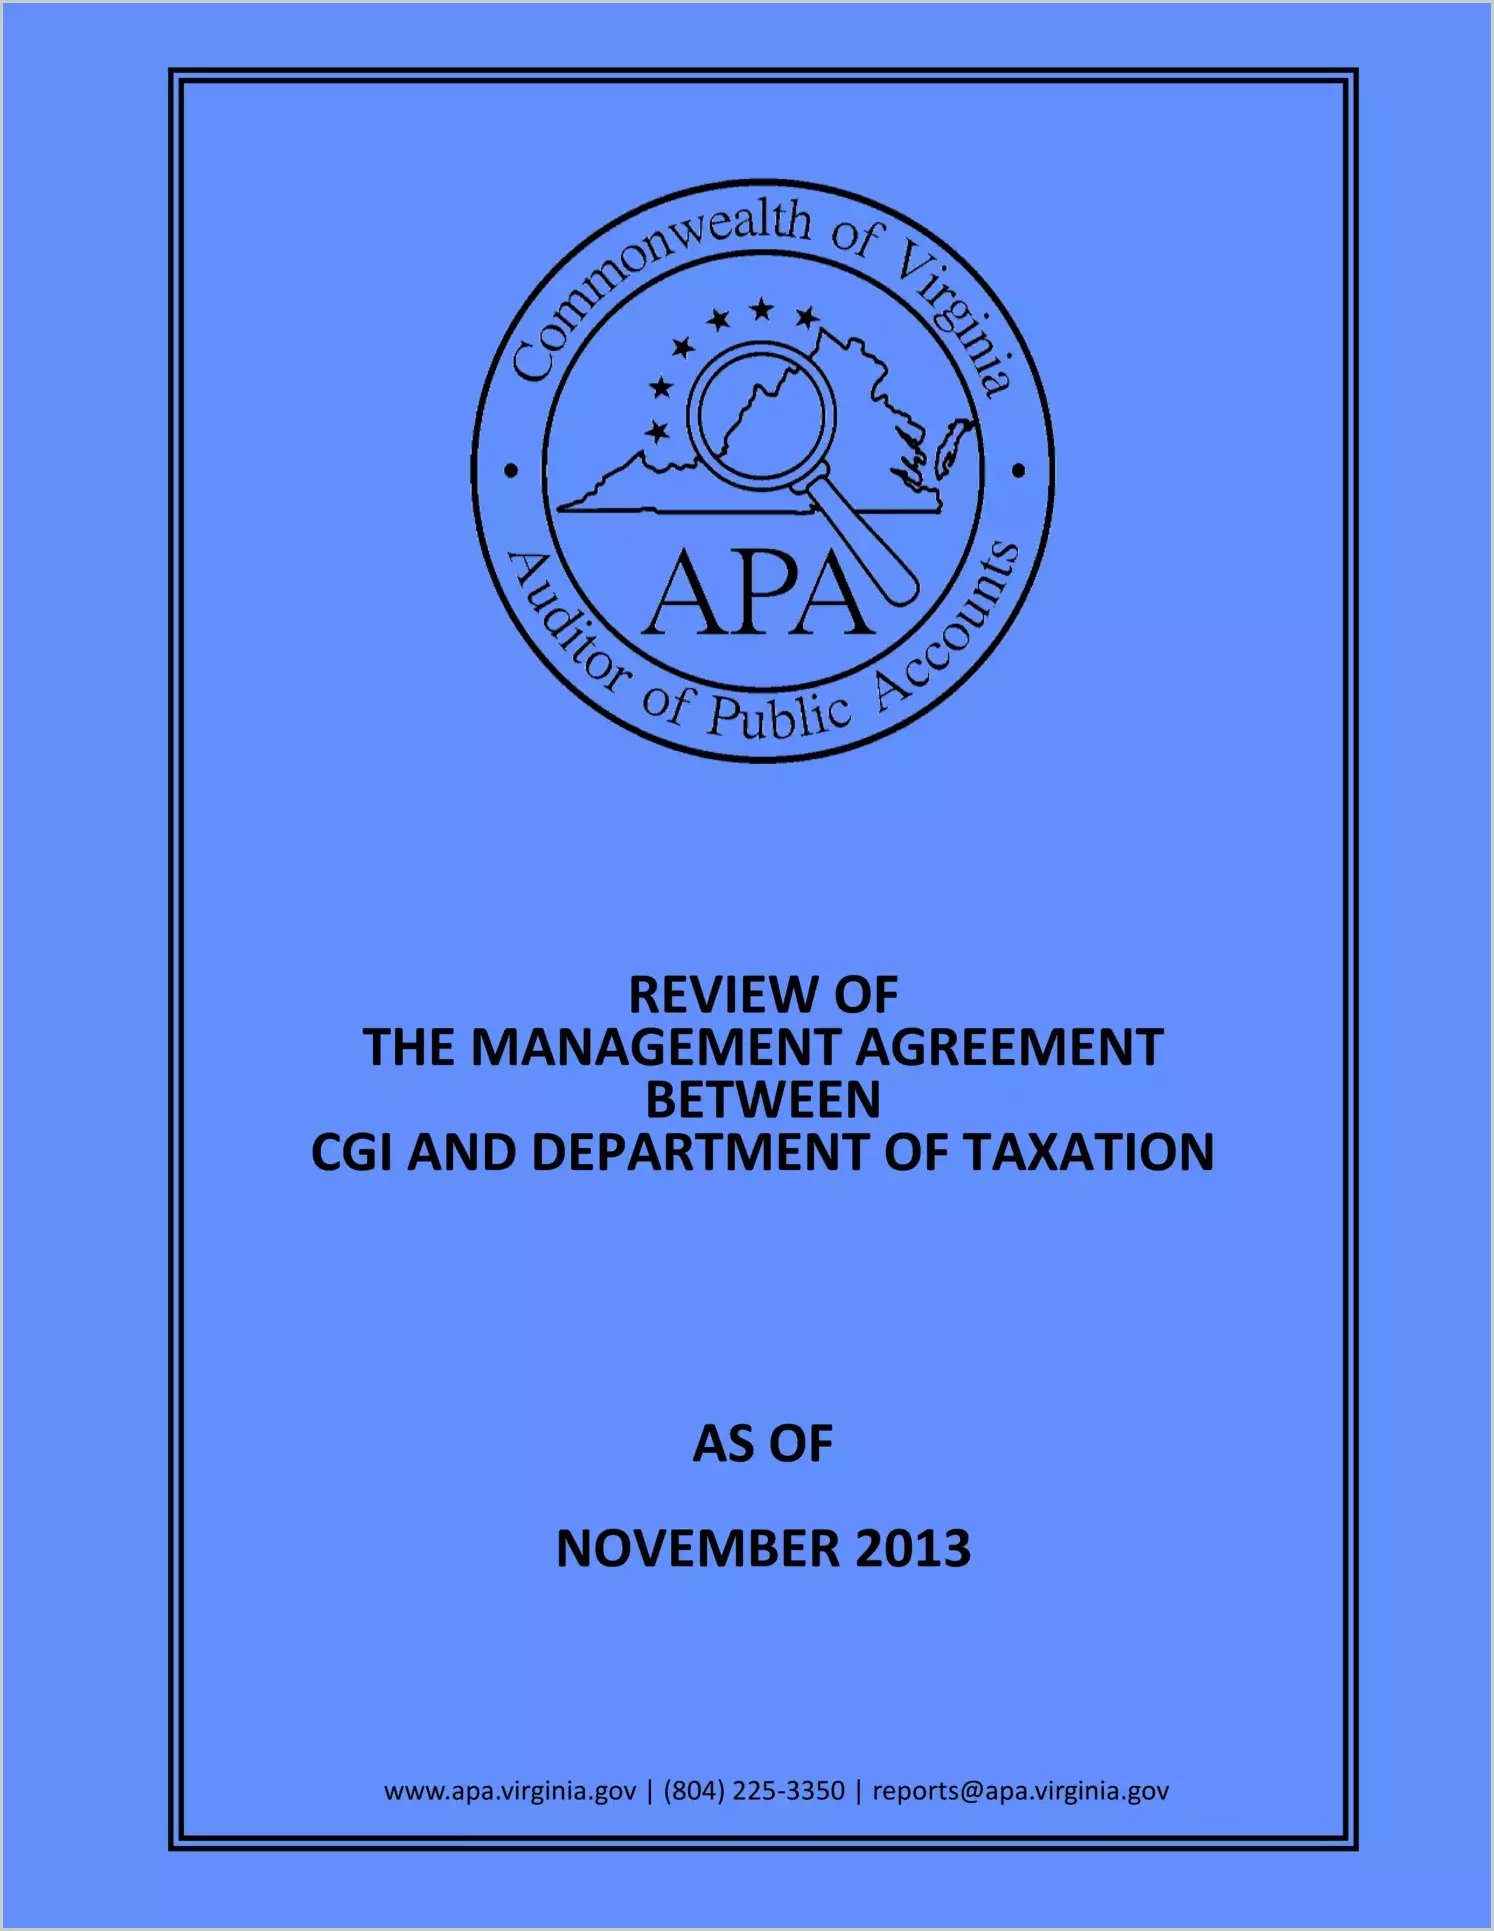 Review of the Management Agreement between CGI and Department of Taxation as of November 2013